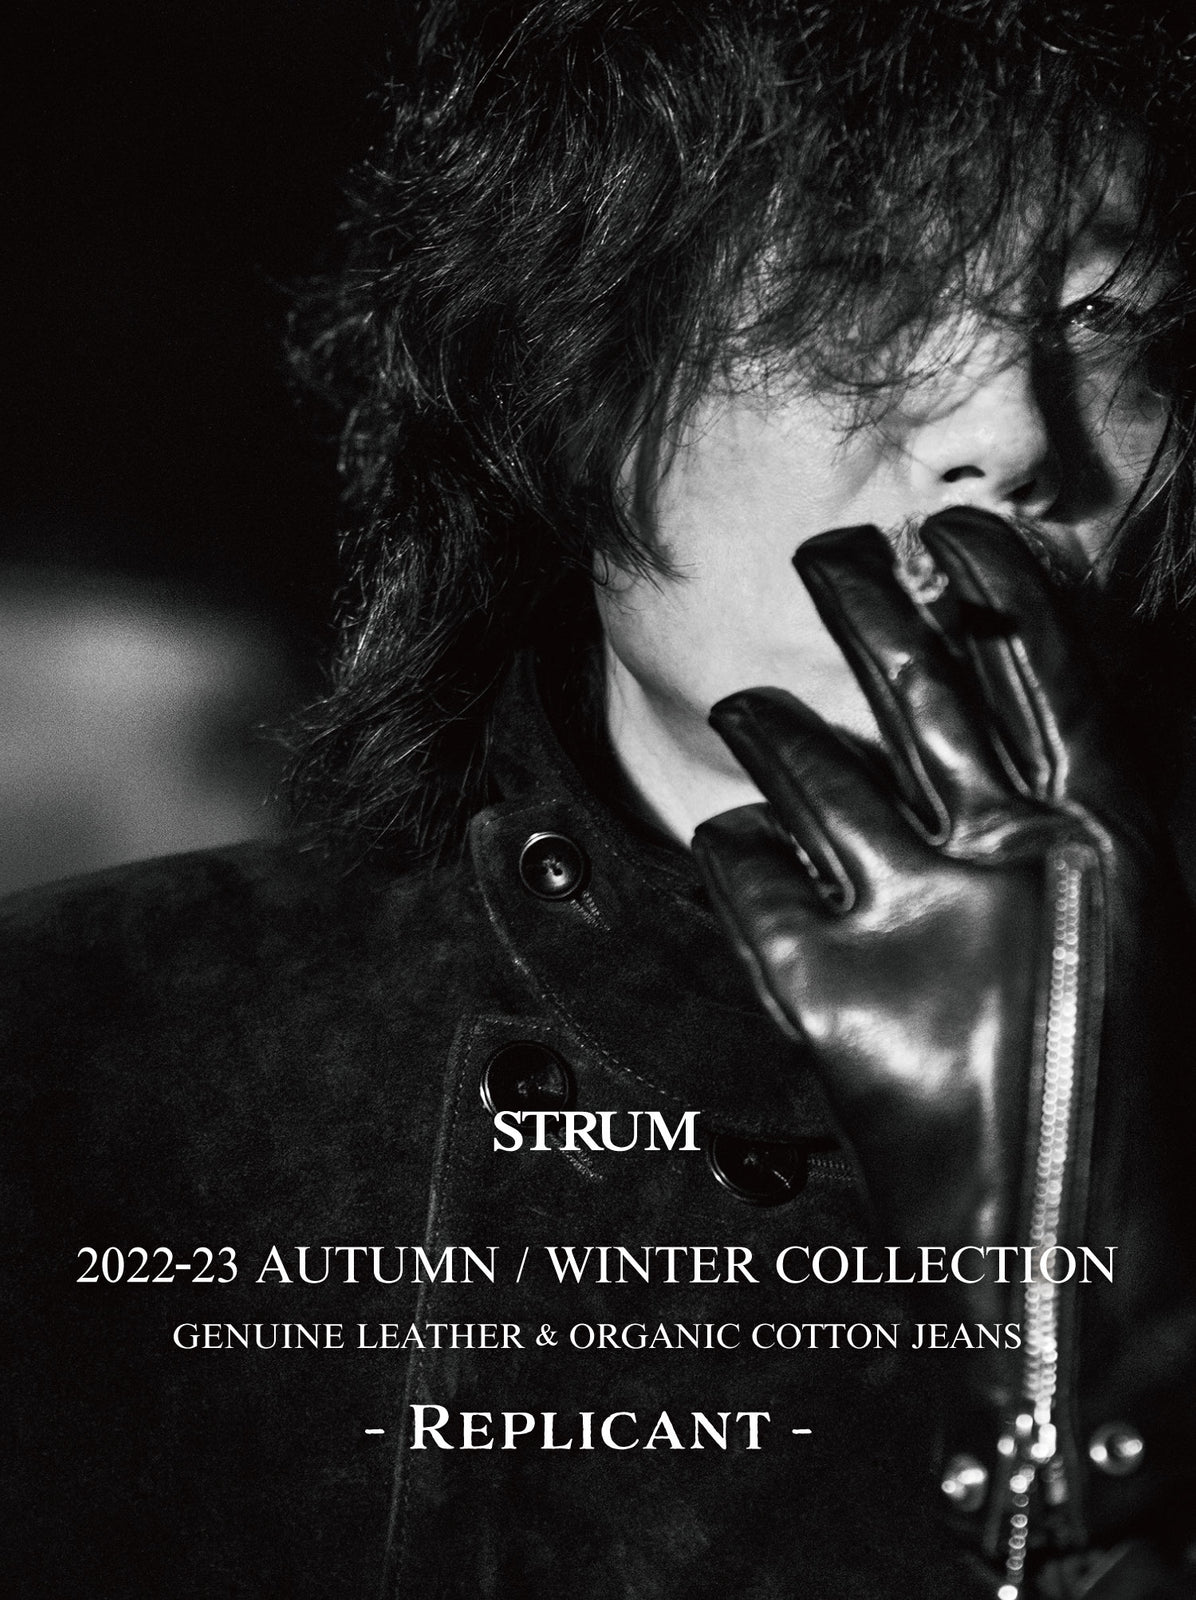 STRUM" 2022-23 AUTUMN / WINTER COLLECTION - Replicant - Image Photo #3 is now available!